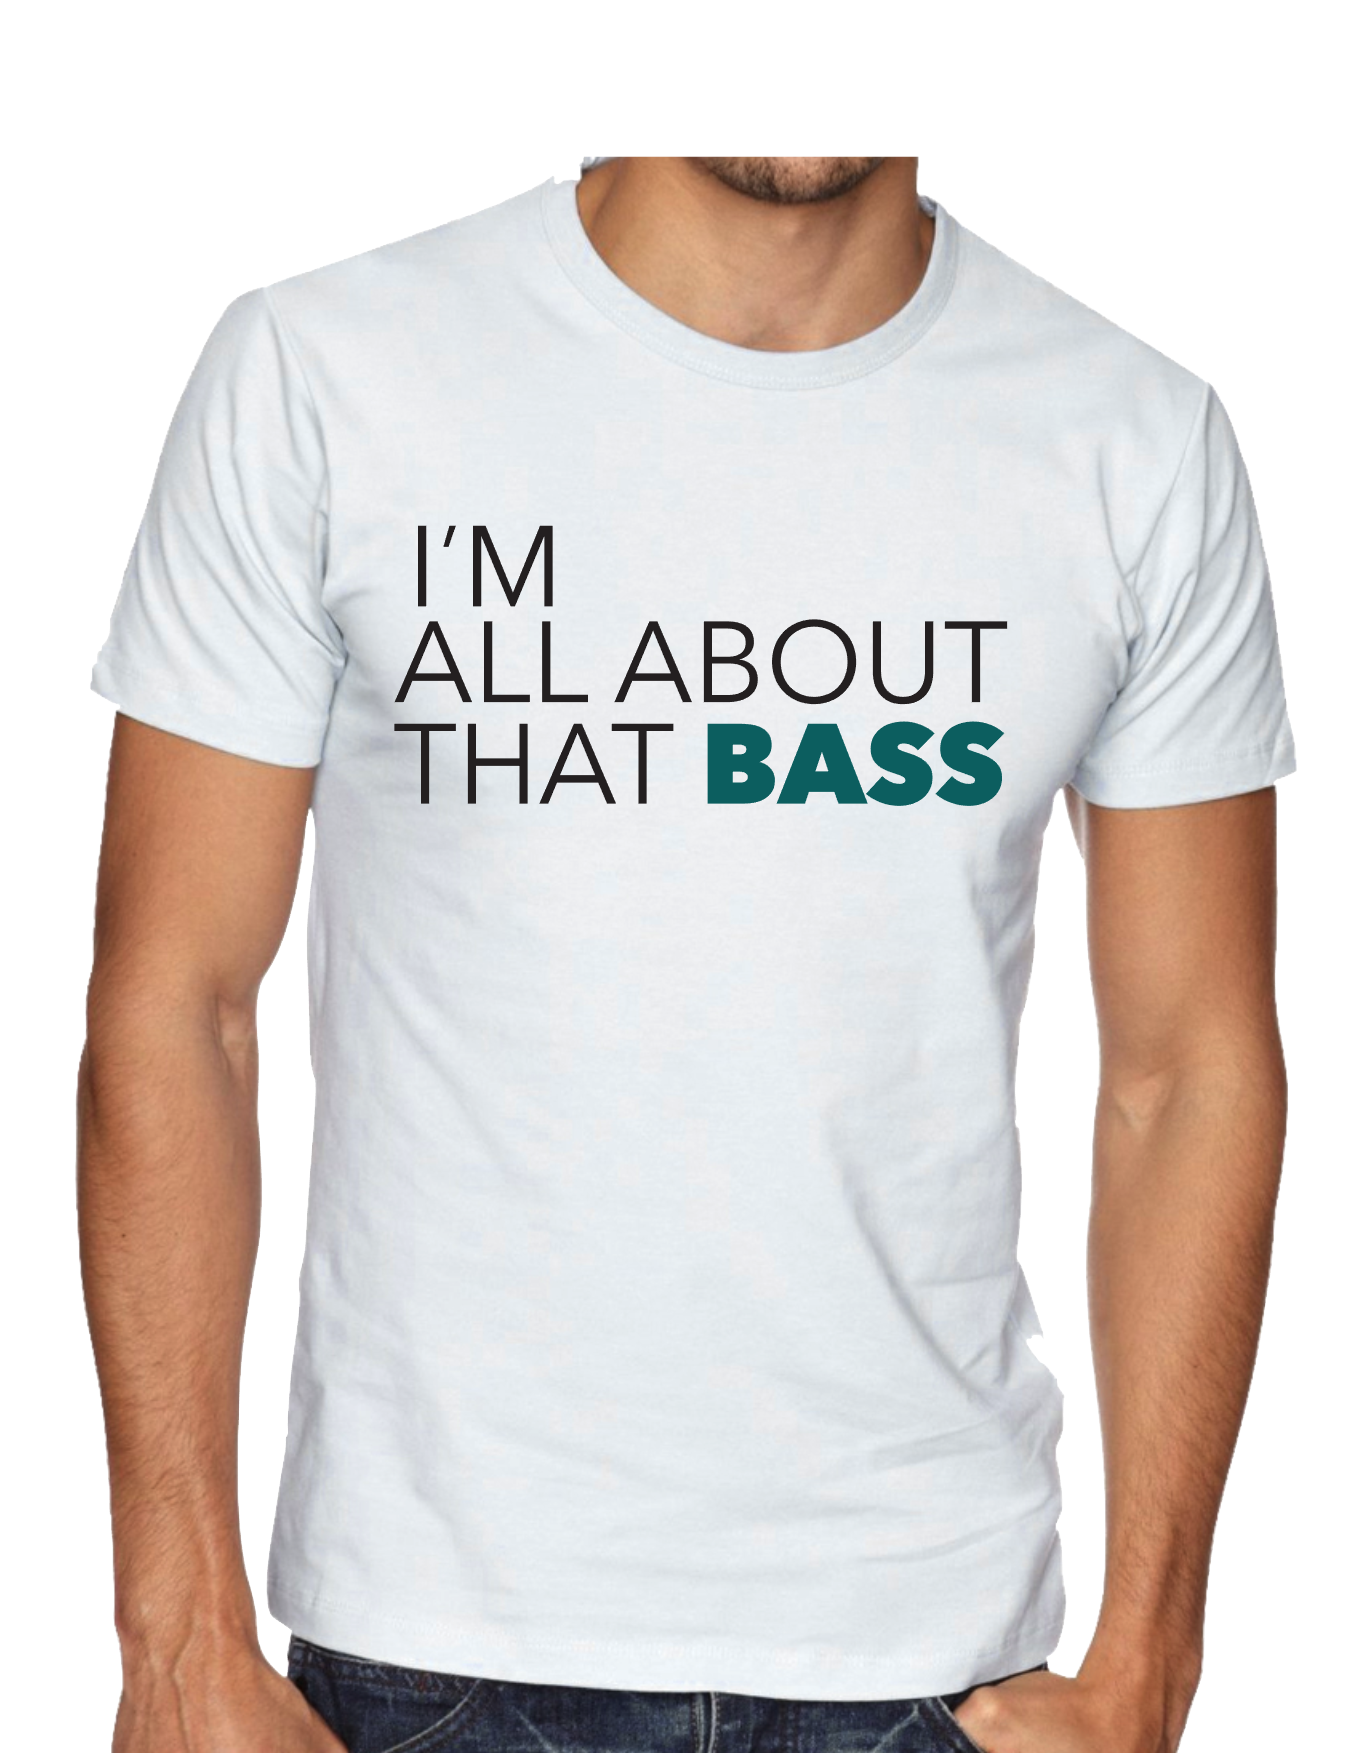 I'm All About That Bass